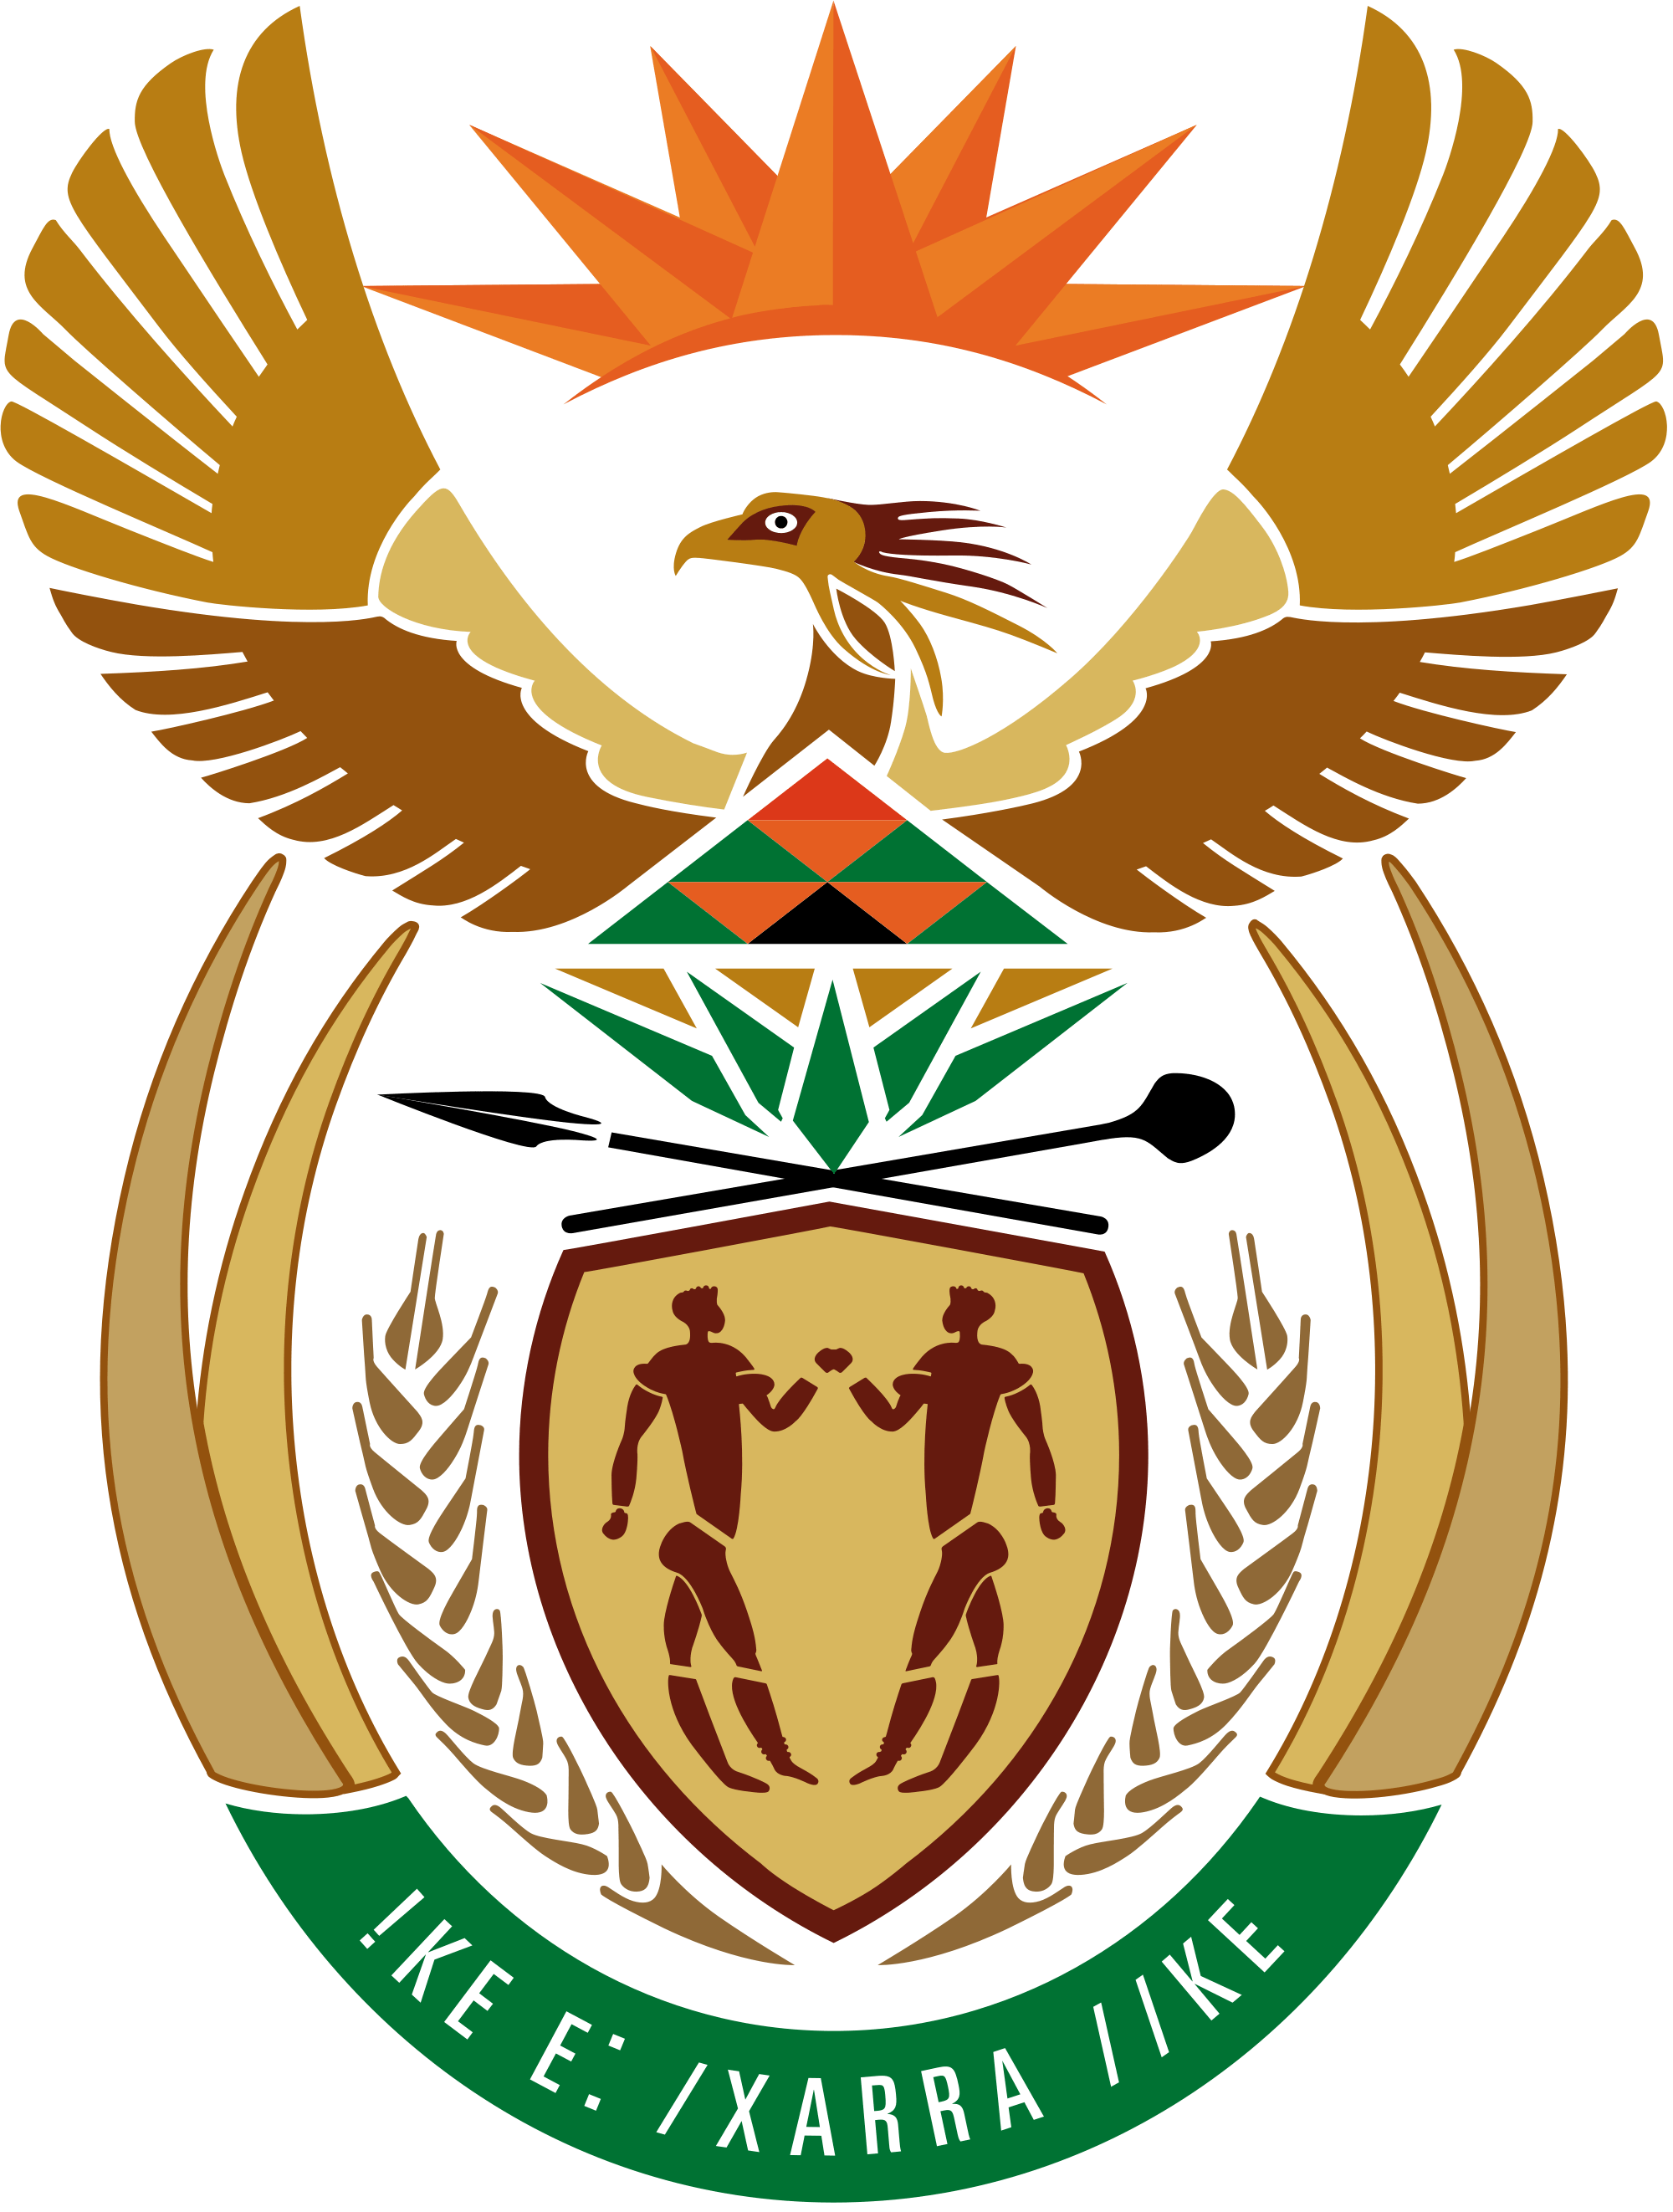 DEPARTMENT OF MINERALS REPUBLIC OF SOUTH AFRICA